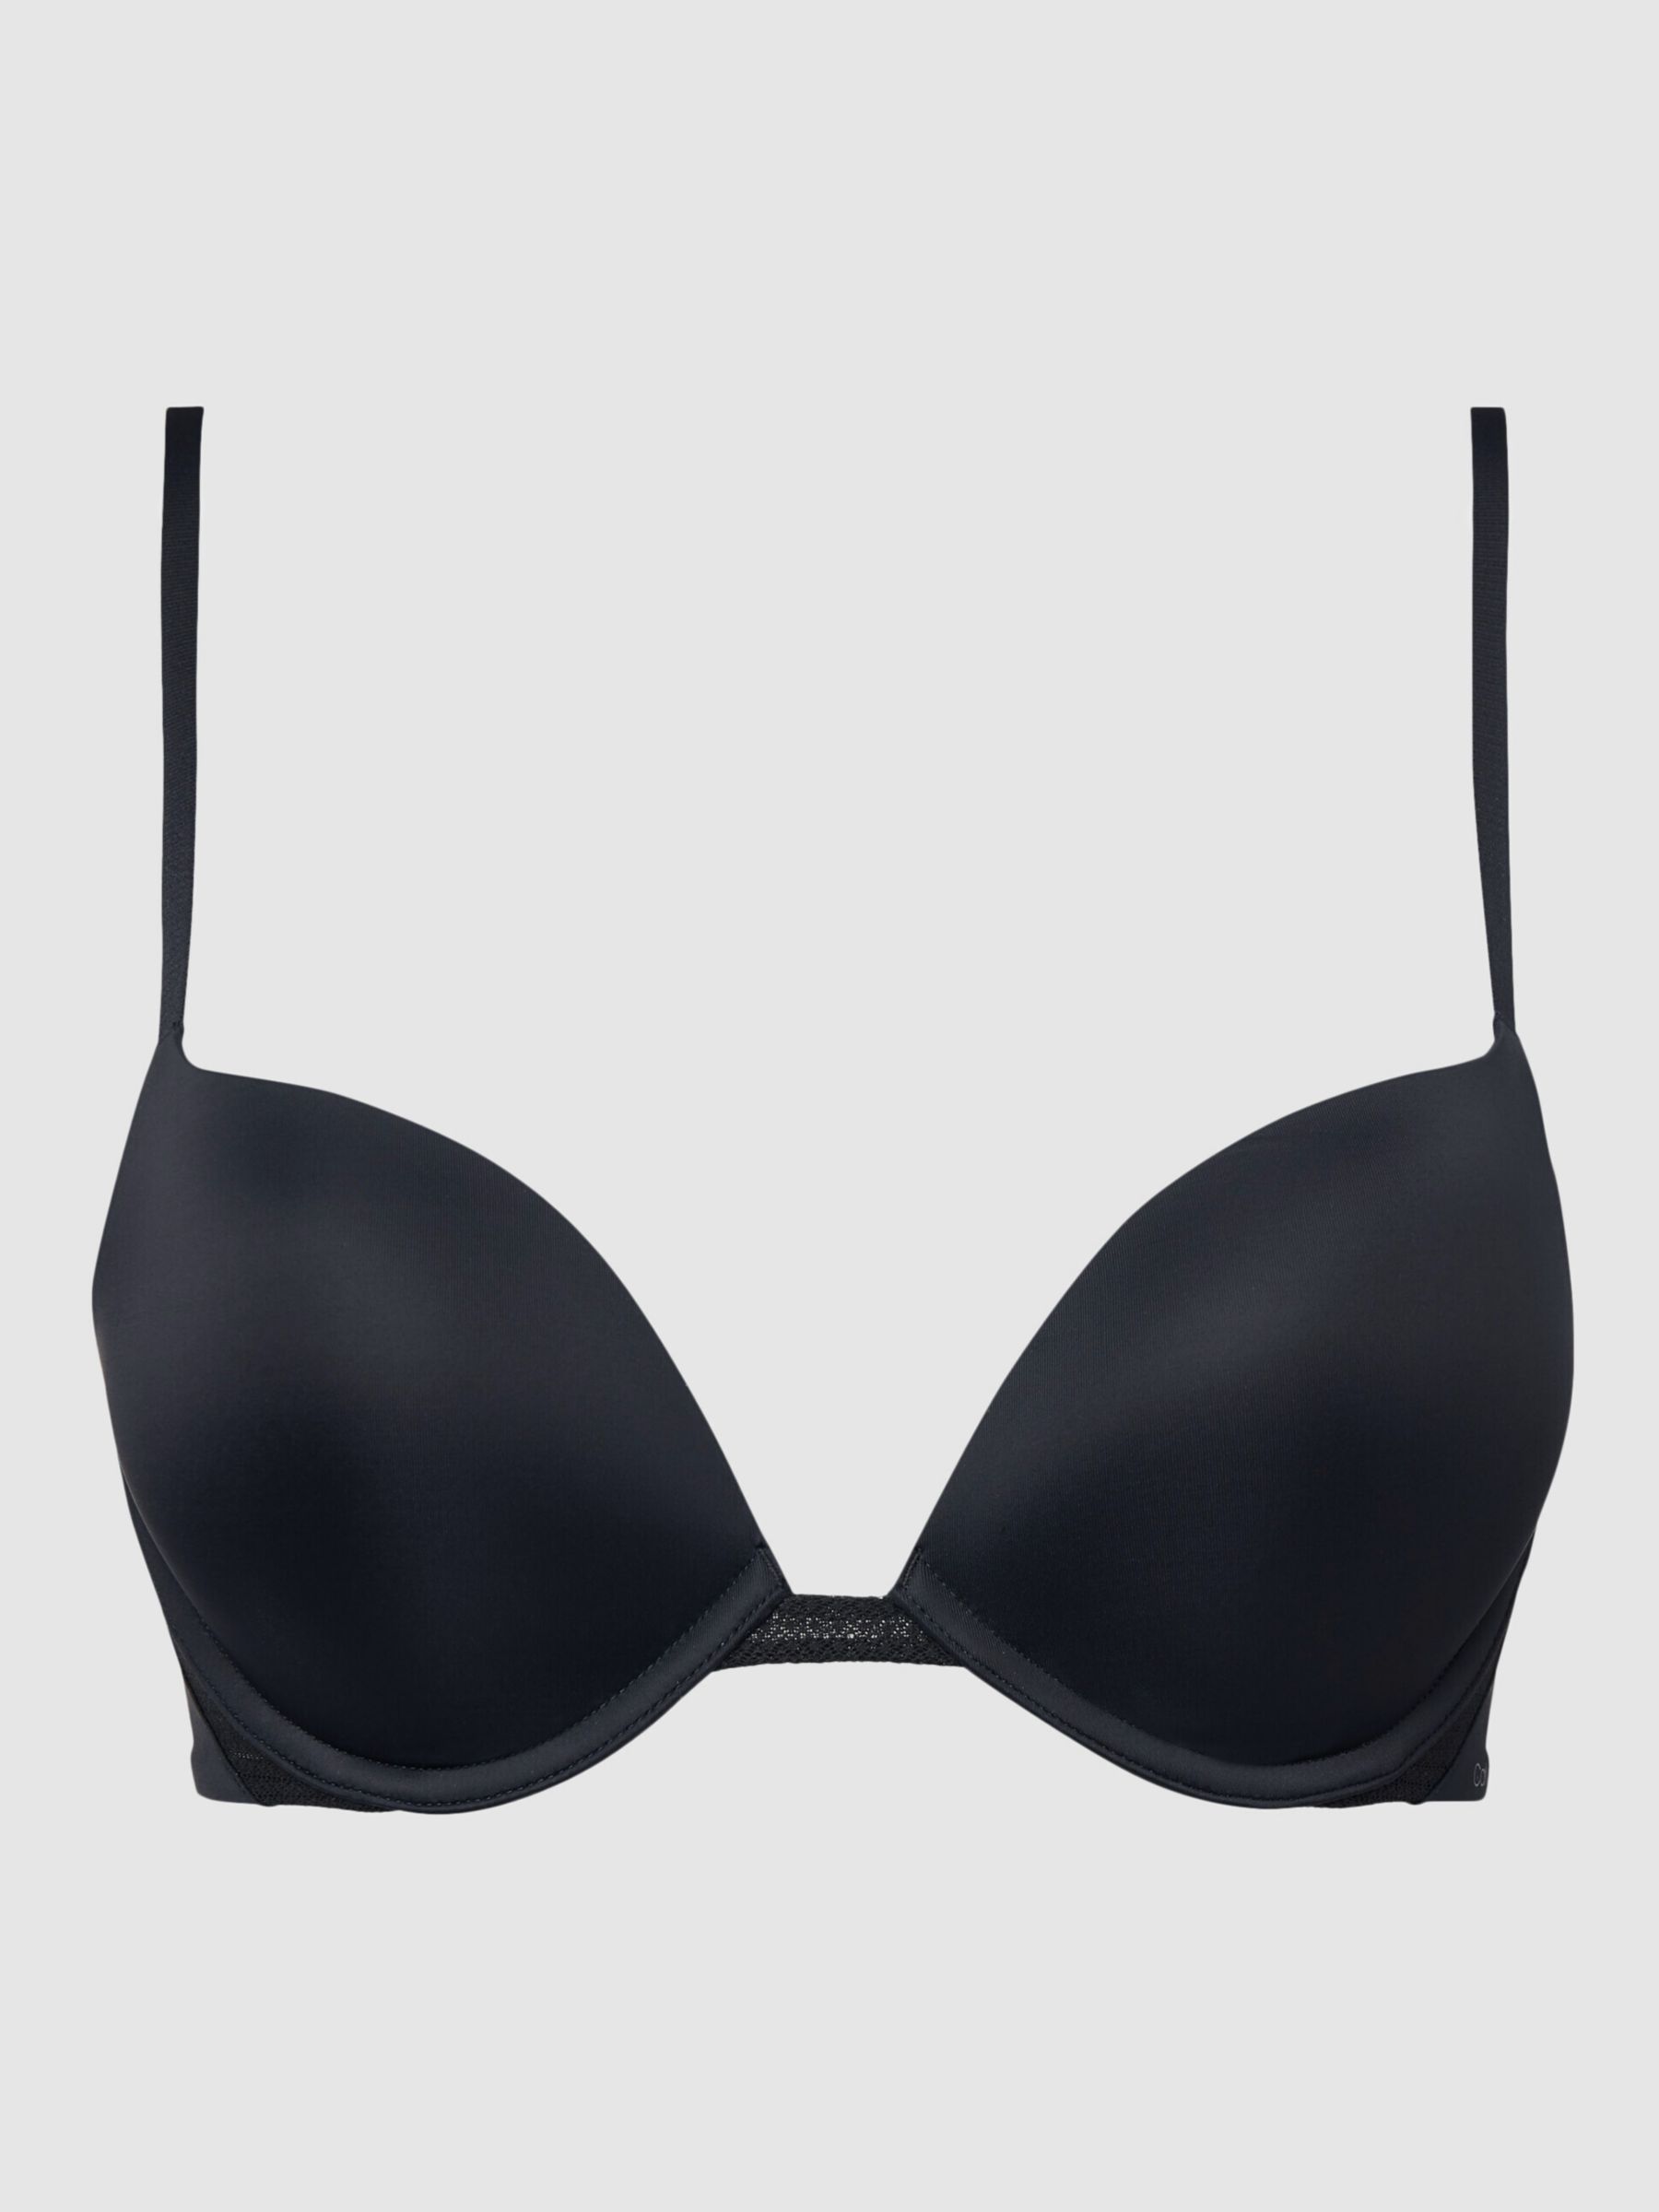 Calvin Klein Strapless Bra Black Size 32 E / DD - $10 New With Tags - From  Lexi